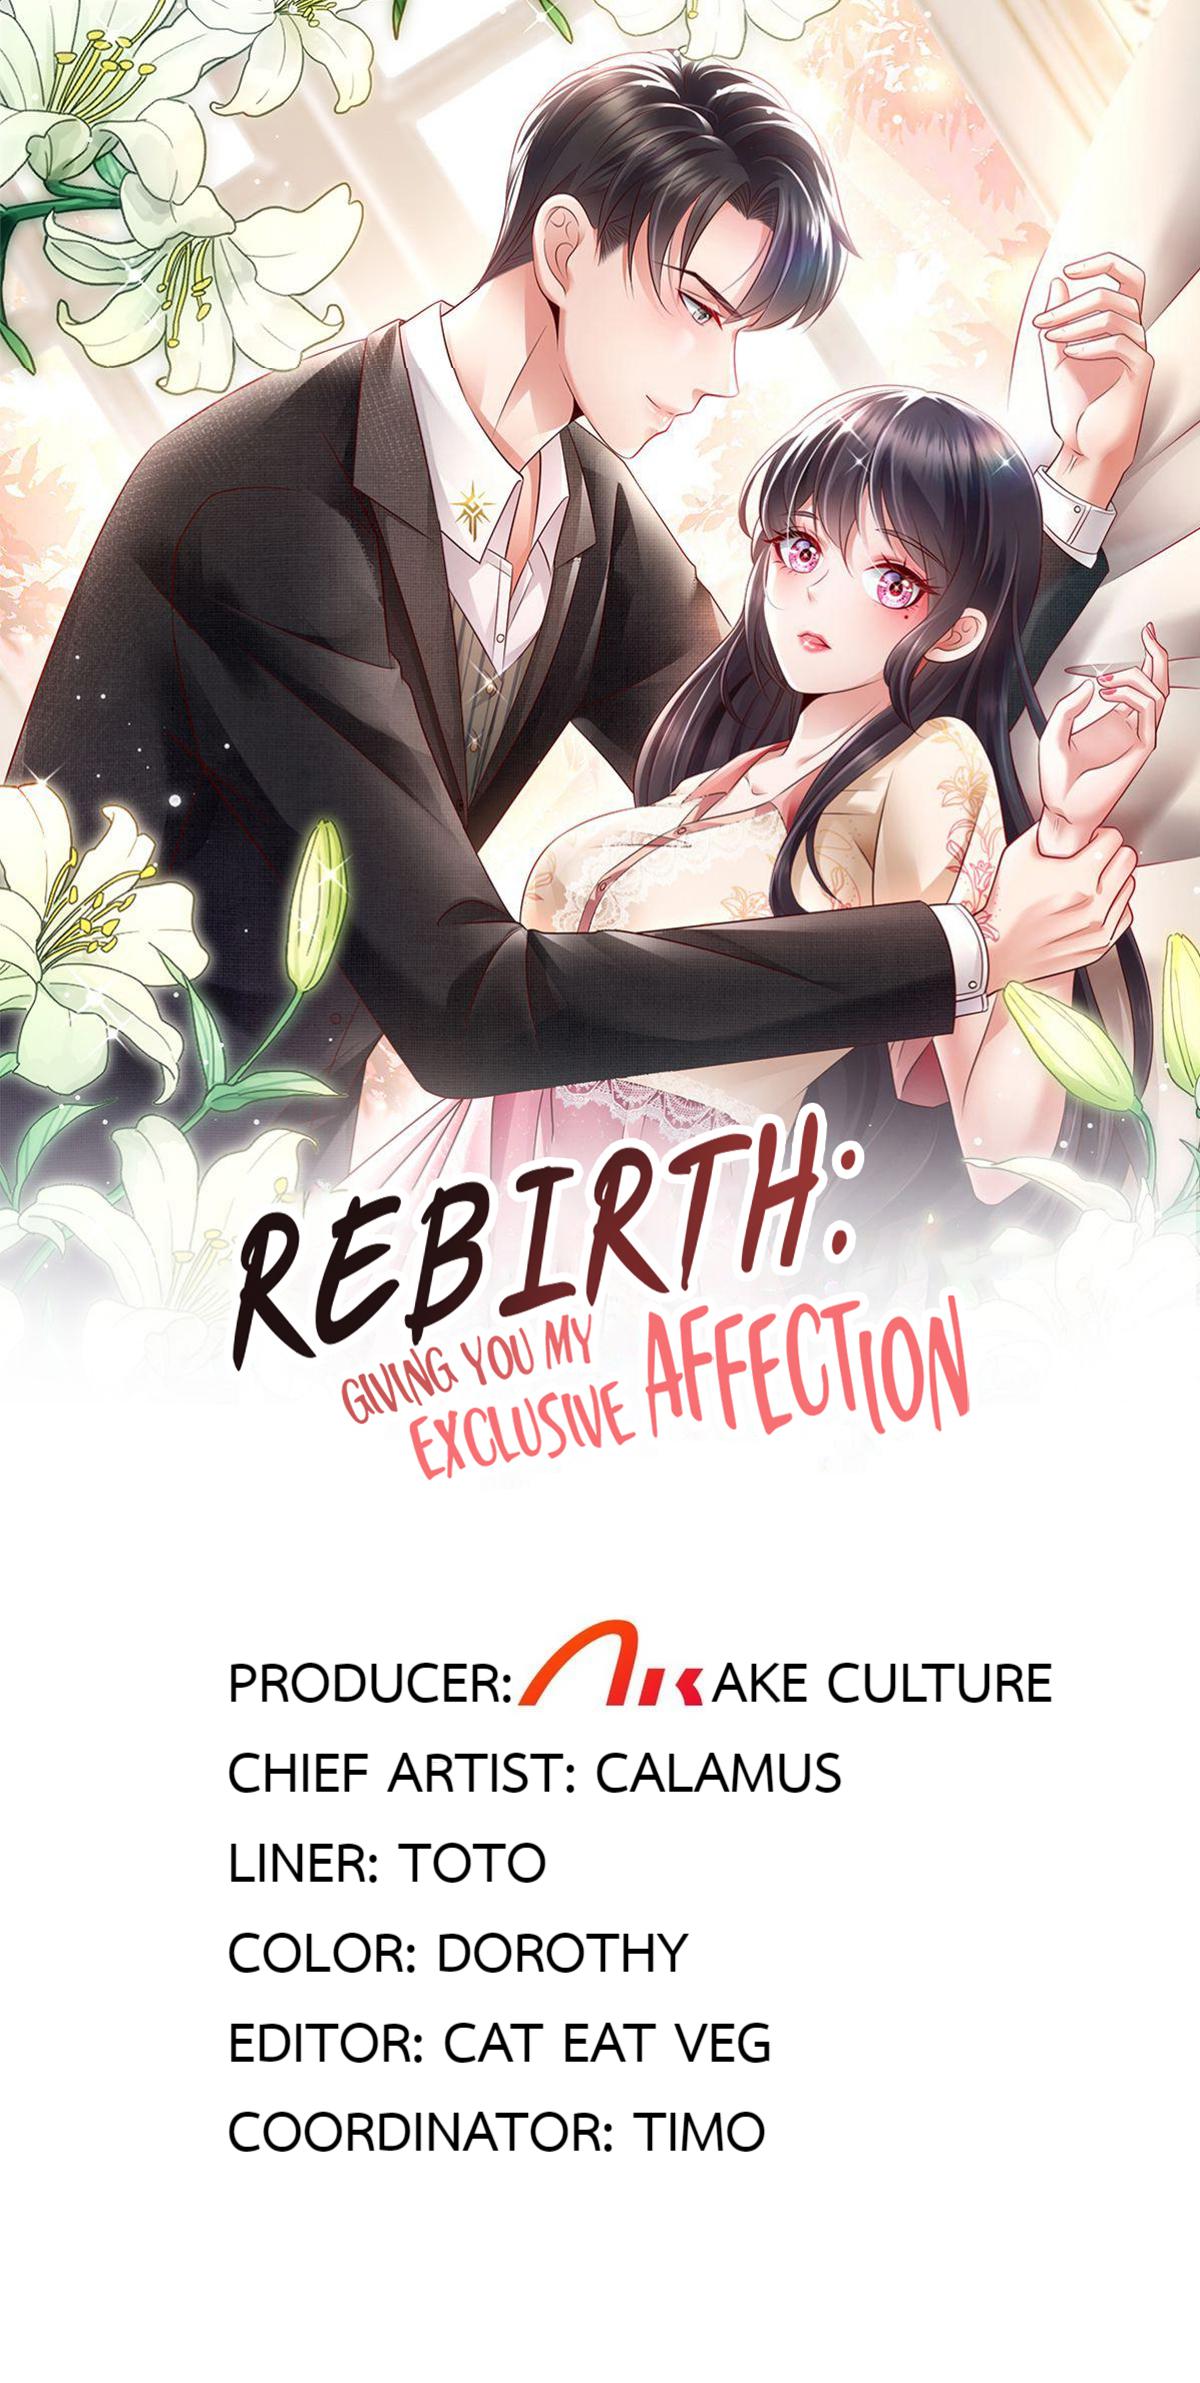 Rebirth: Giving You My Exclusive Affection 40.1 One Hundred Yuan